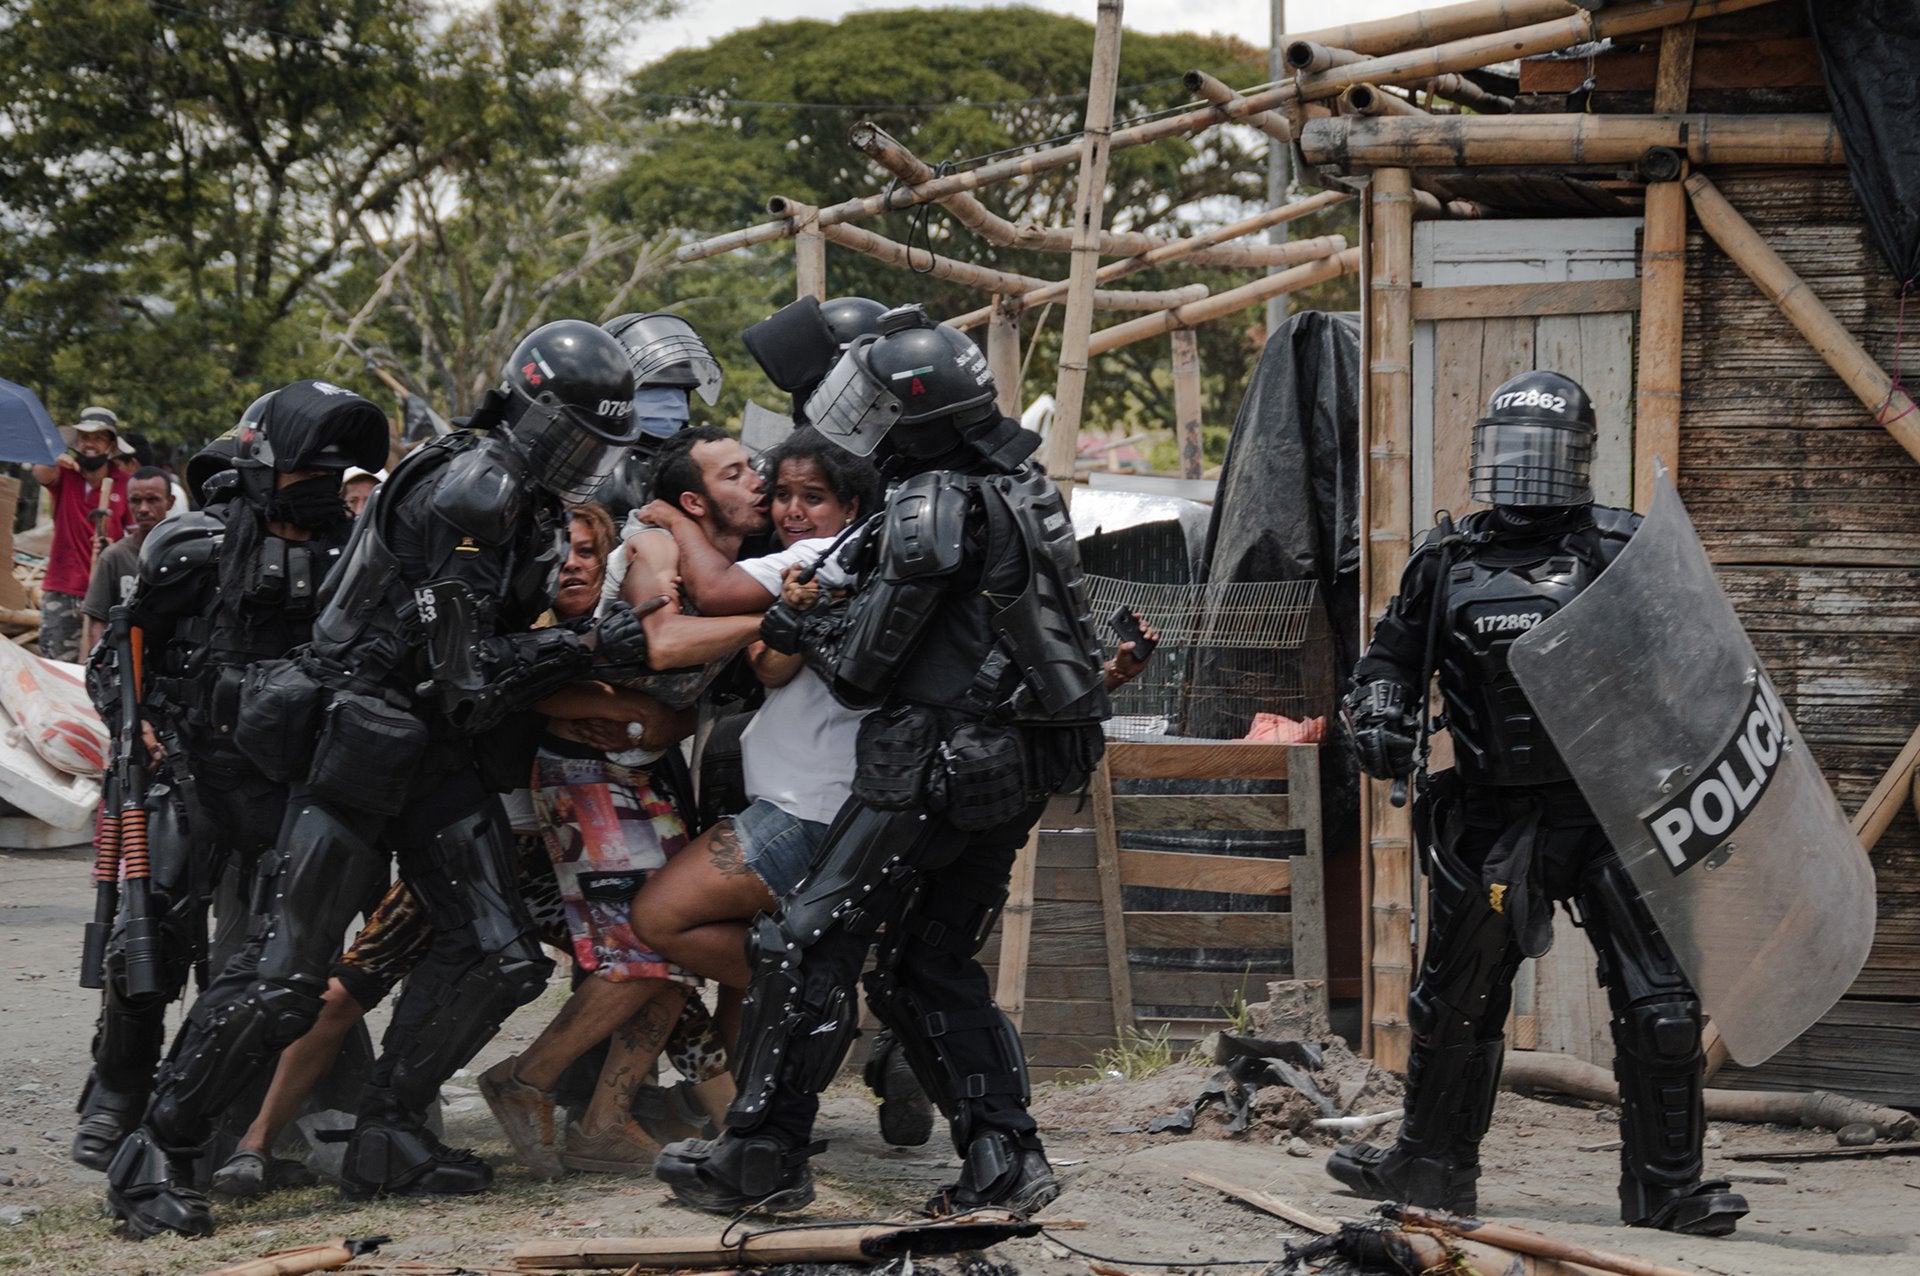 Colombian photographer Vladimir Encina won the Singles category for his photo showing police arresting a man during evictions to clear the way for a “railroad megaproject” in Puerto Caldas, Colombia.